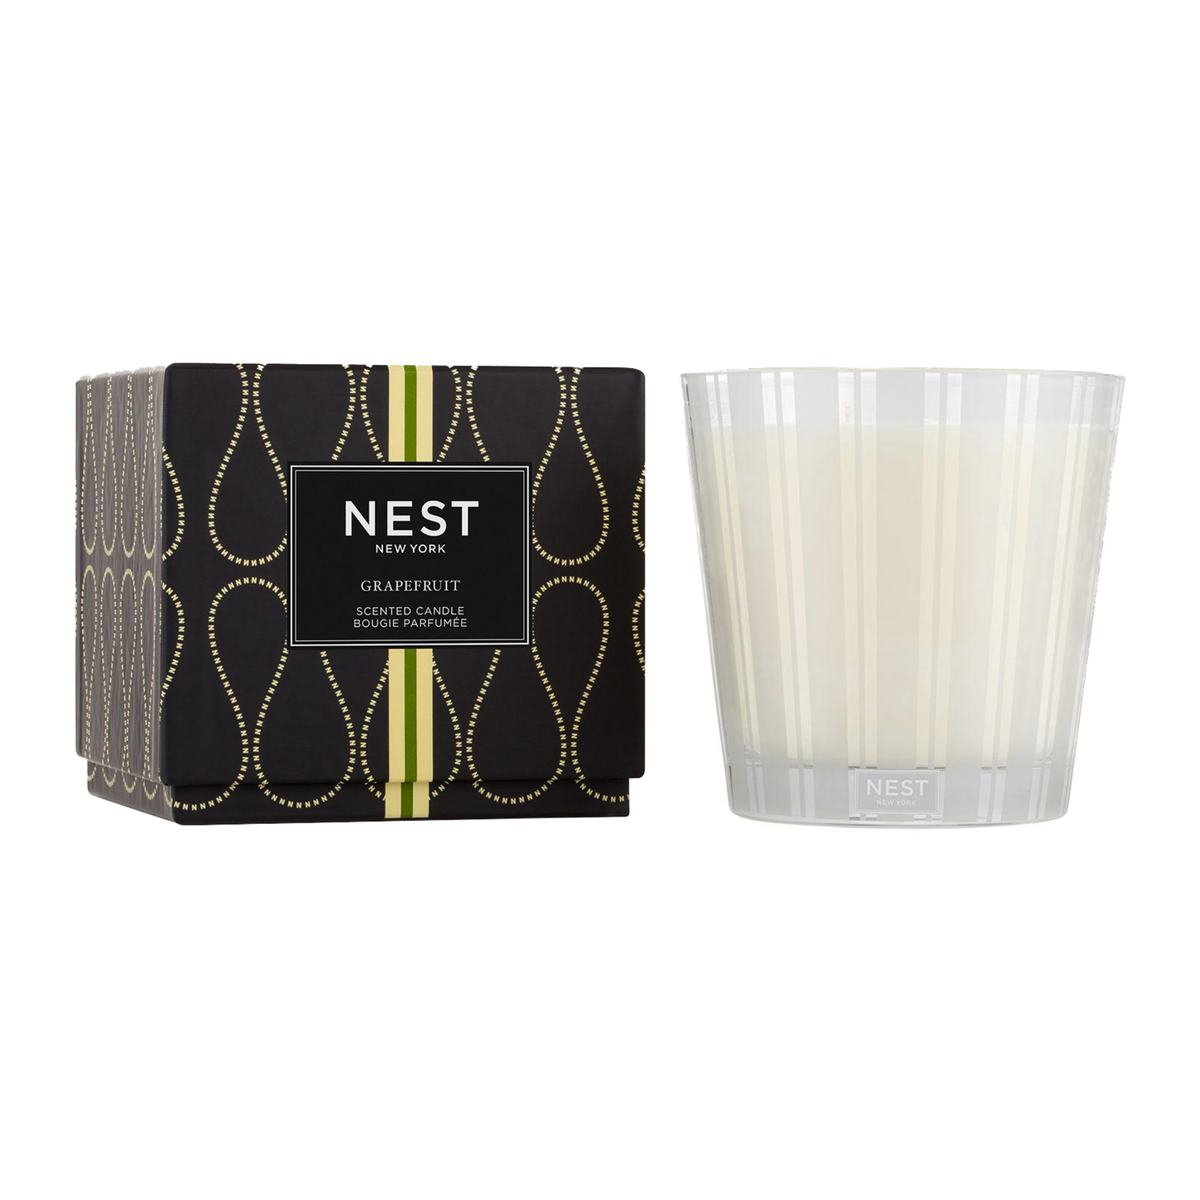 Product Image of Nest New York’s Grapefruit 3-Wick Candle with Box